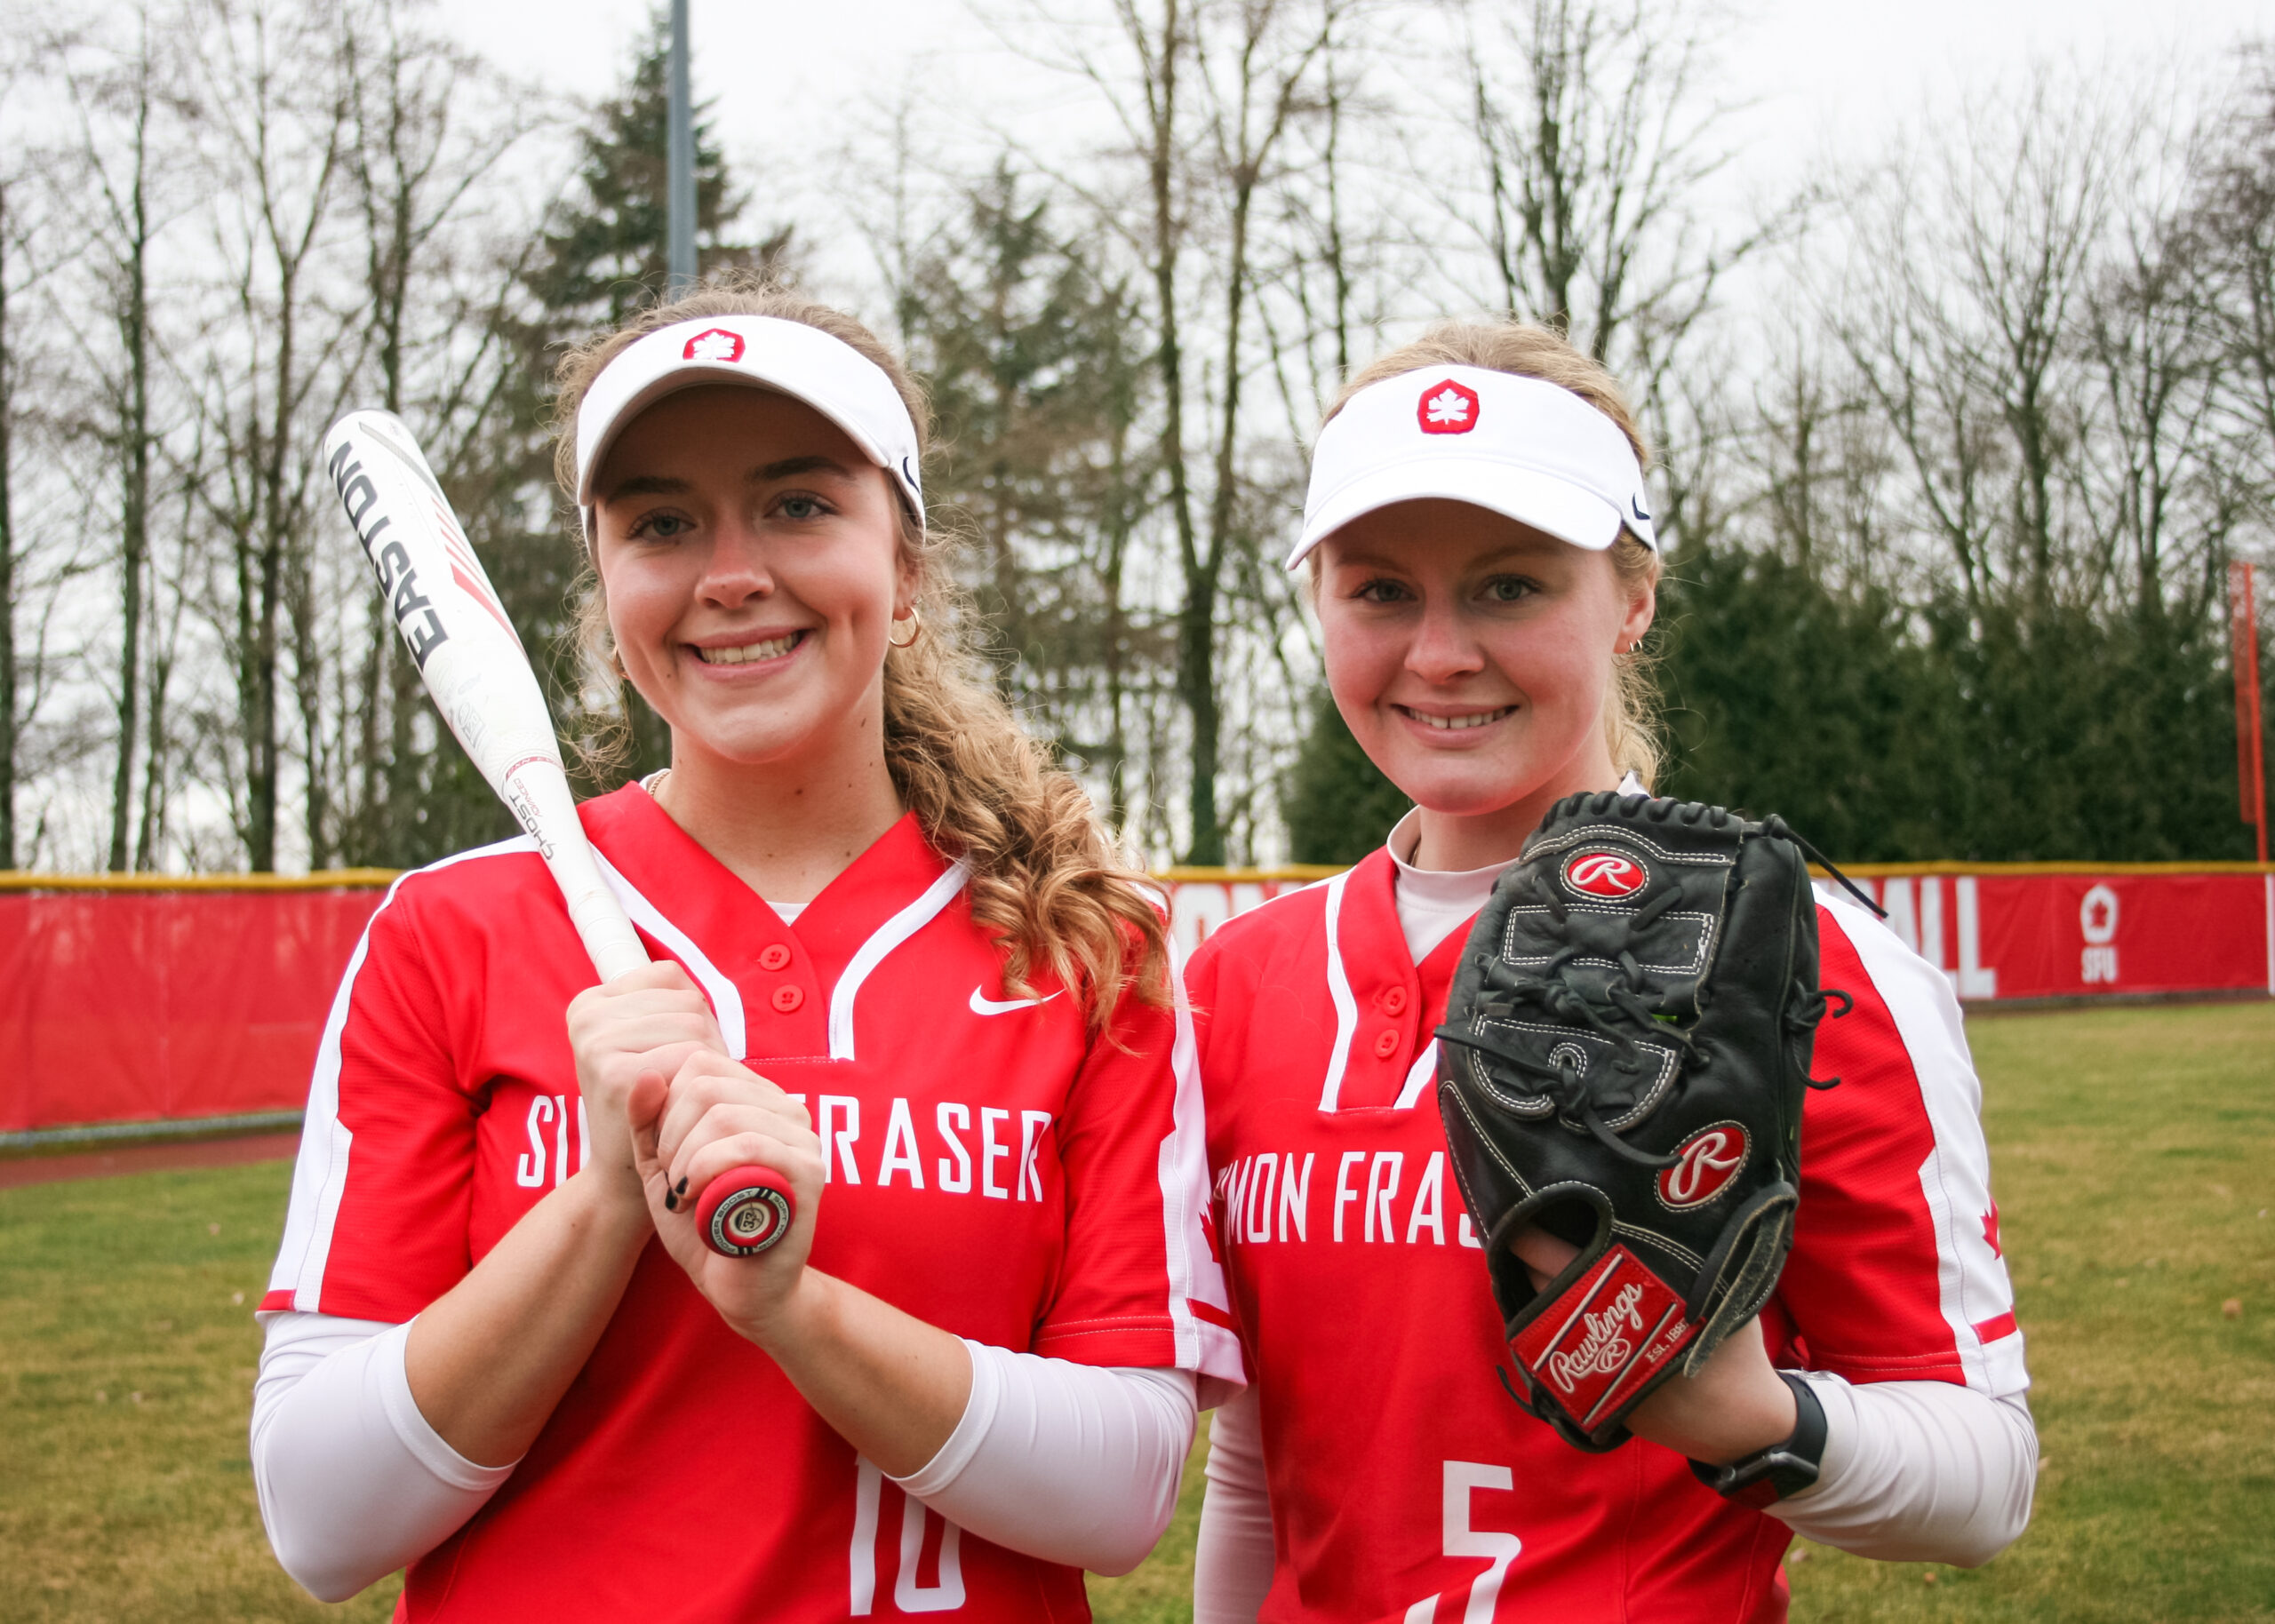 SFU softball players Rebecca Kirkpatrick and Lauren Schwartz pose with a bat and glove in uniform on the field.